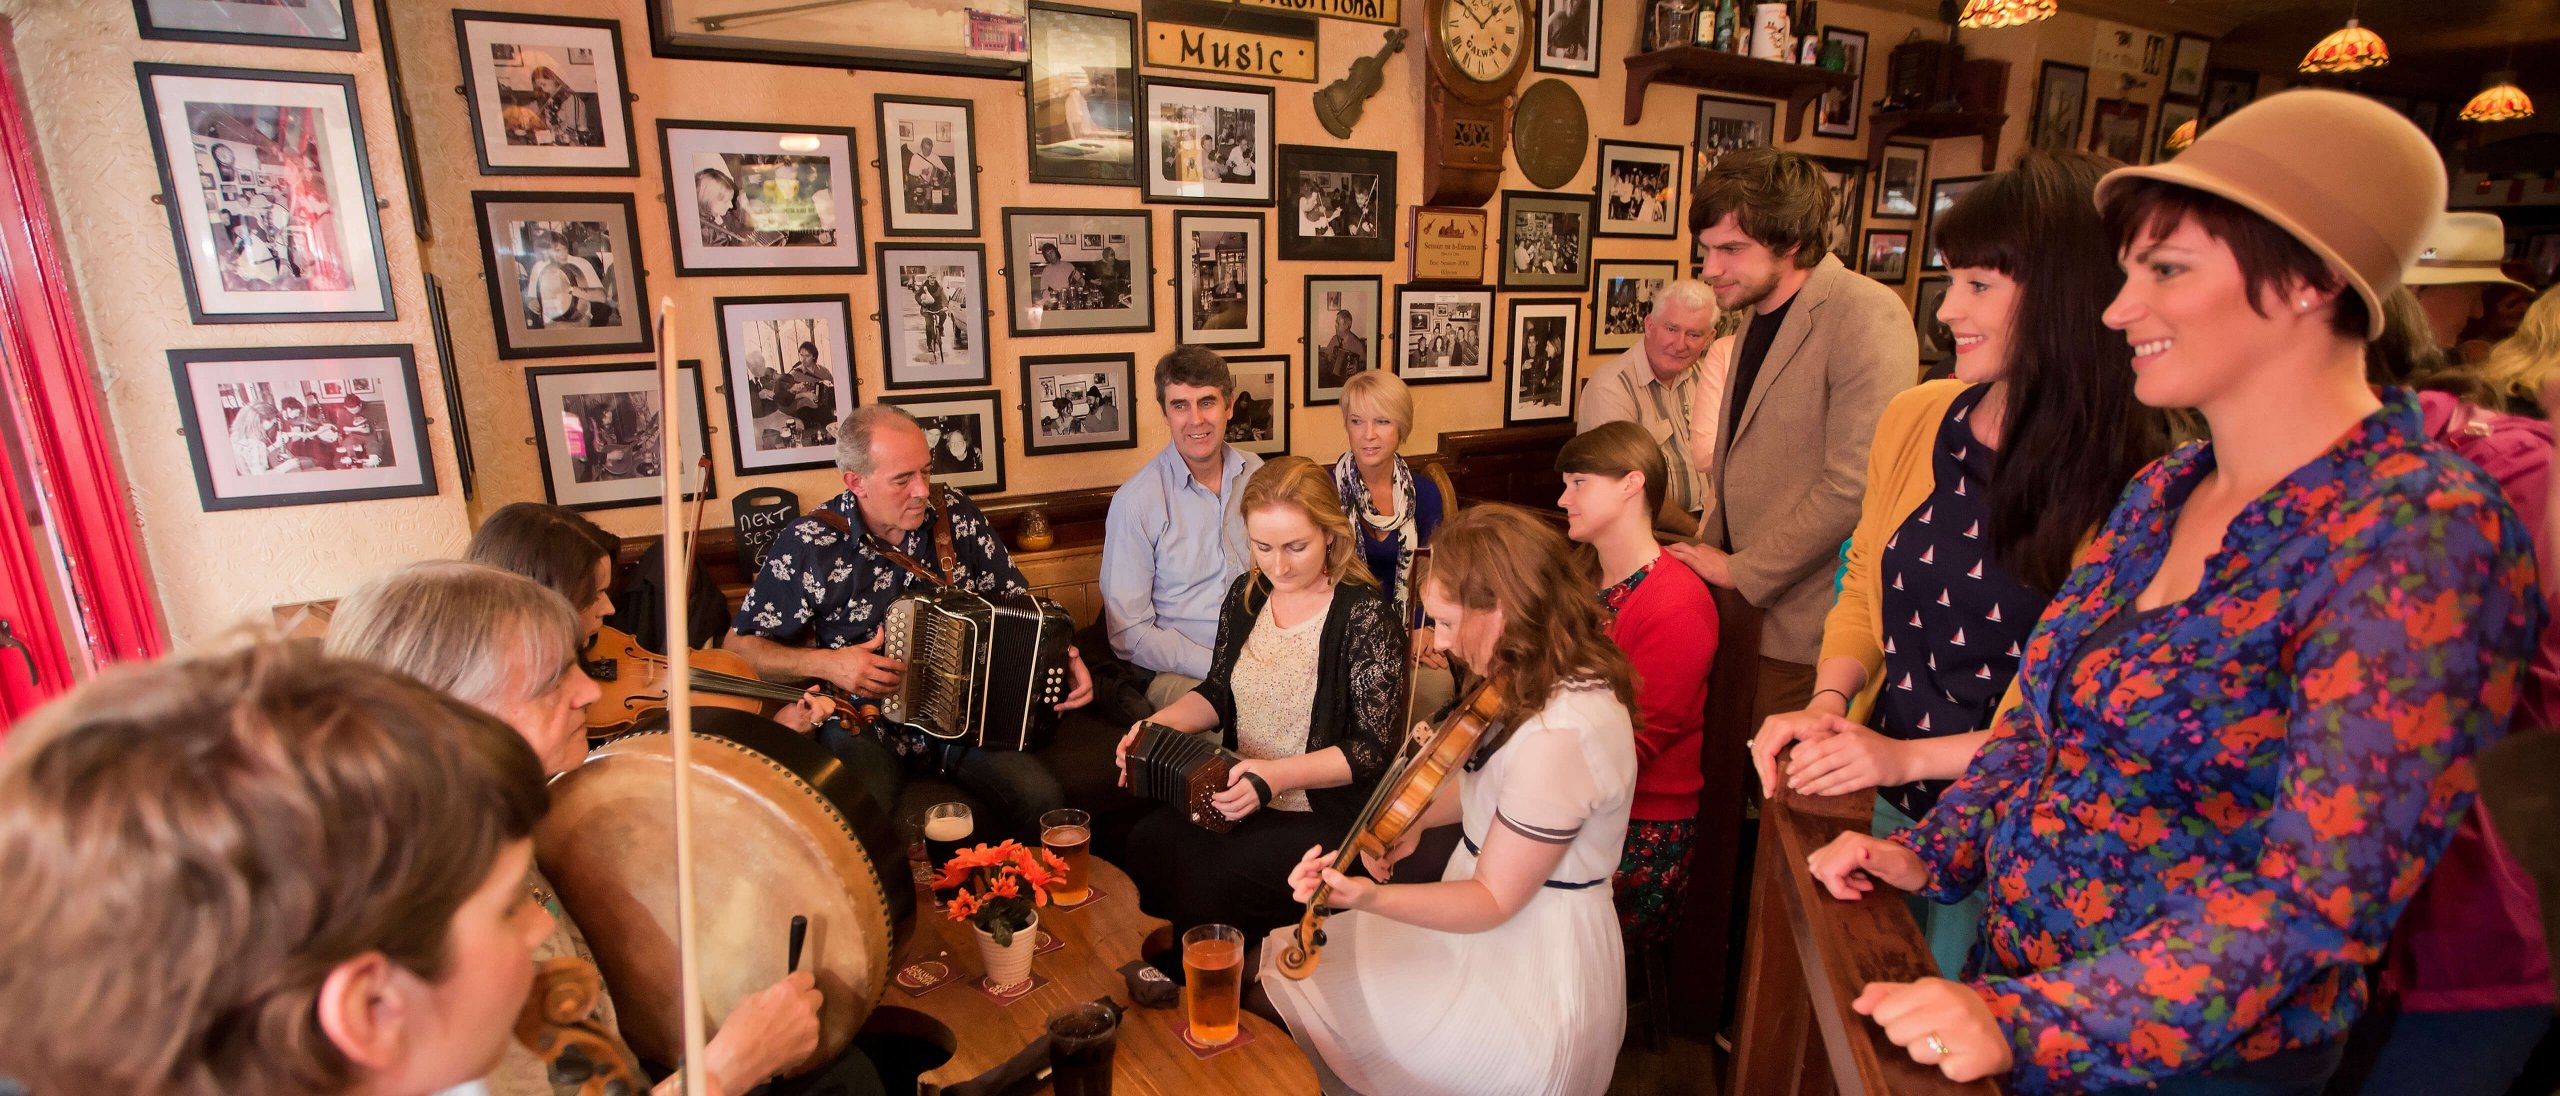 A group of musicians perform traditional Irish music while tourist look on